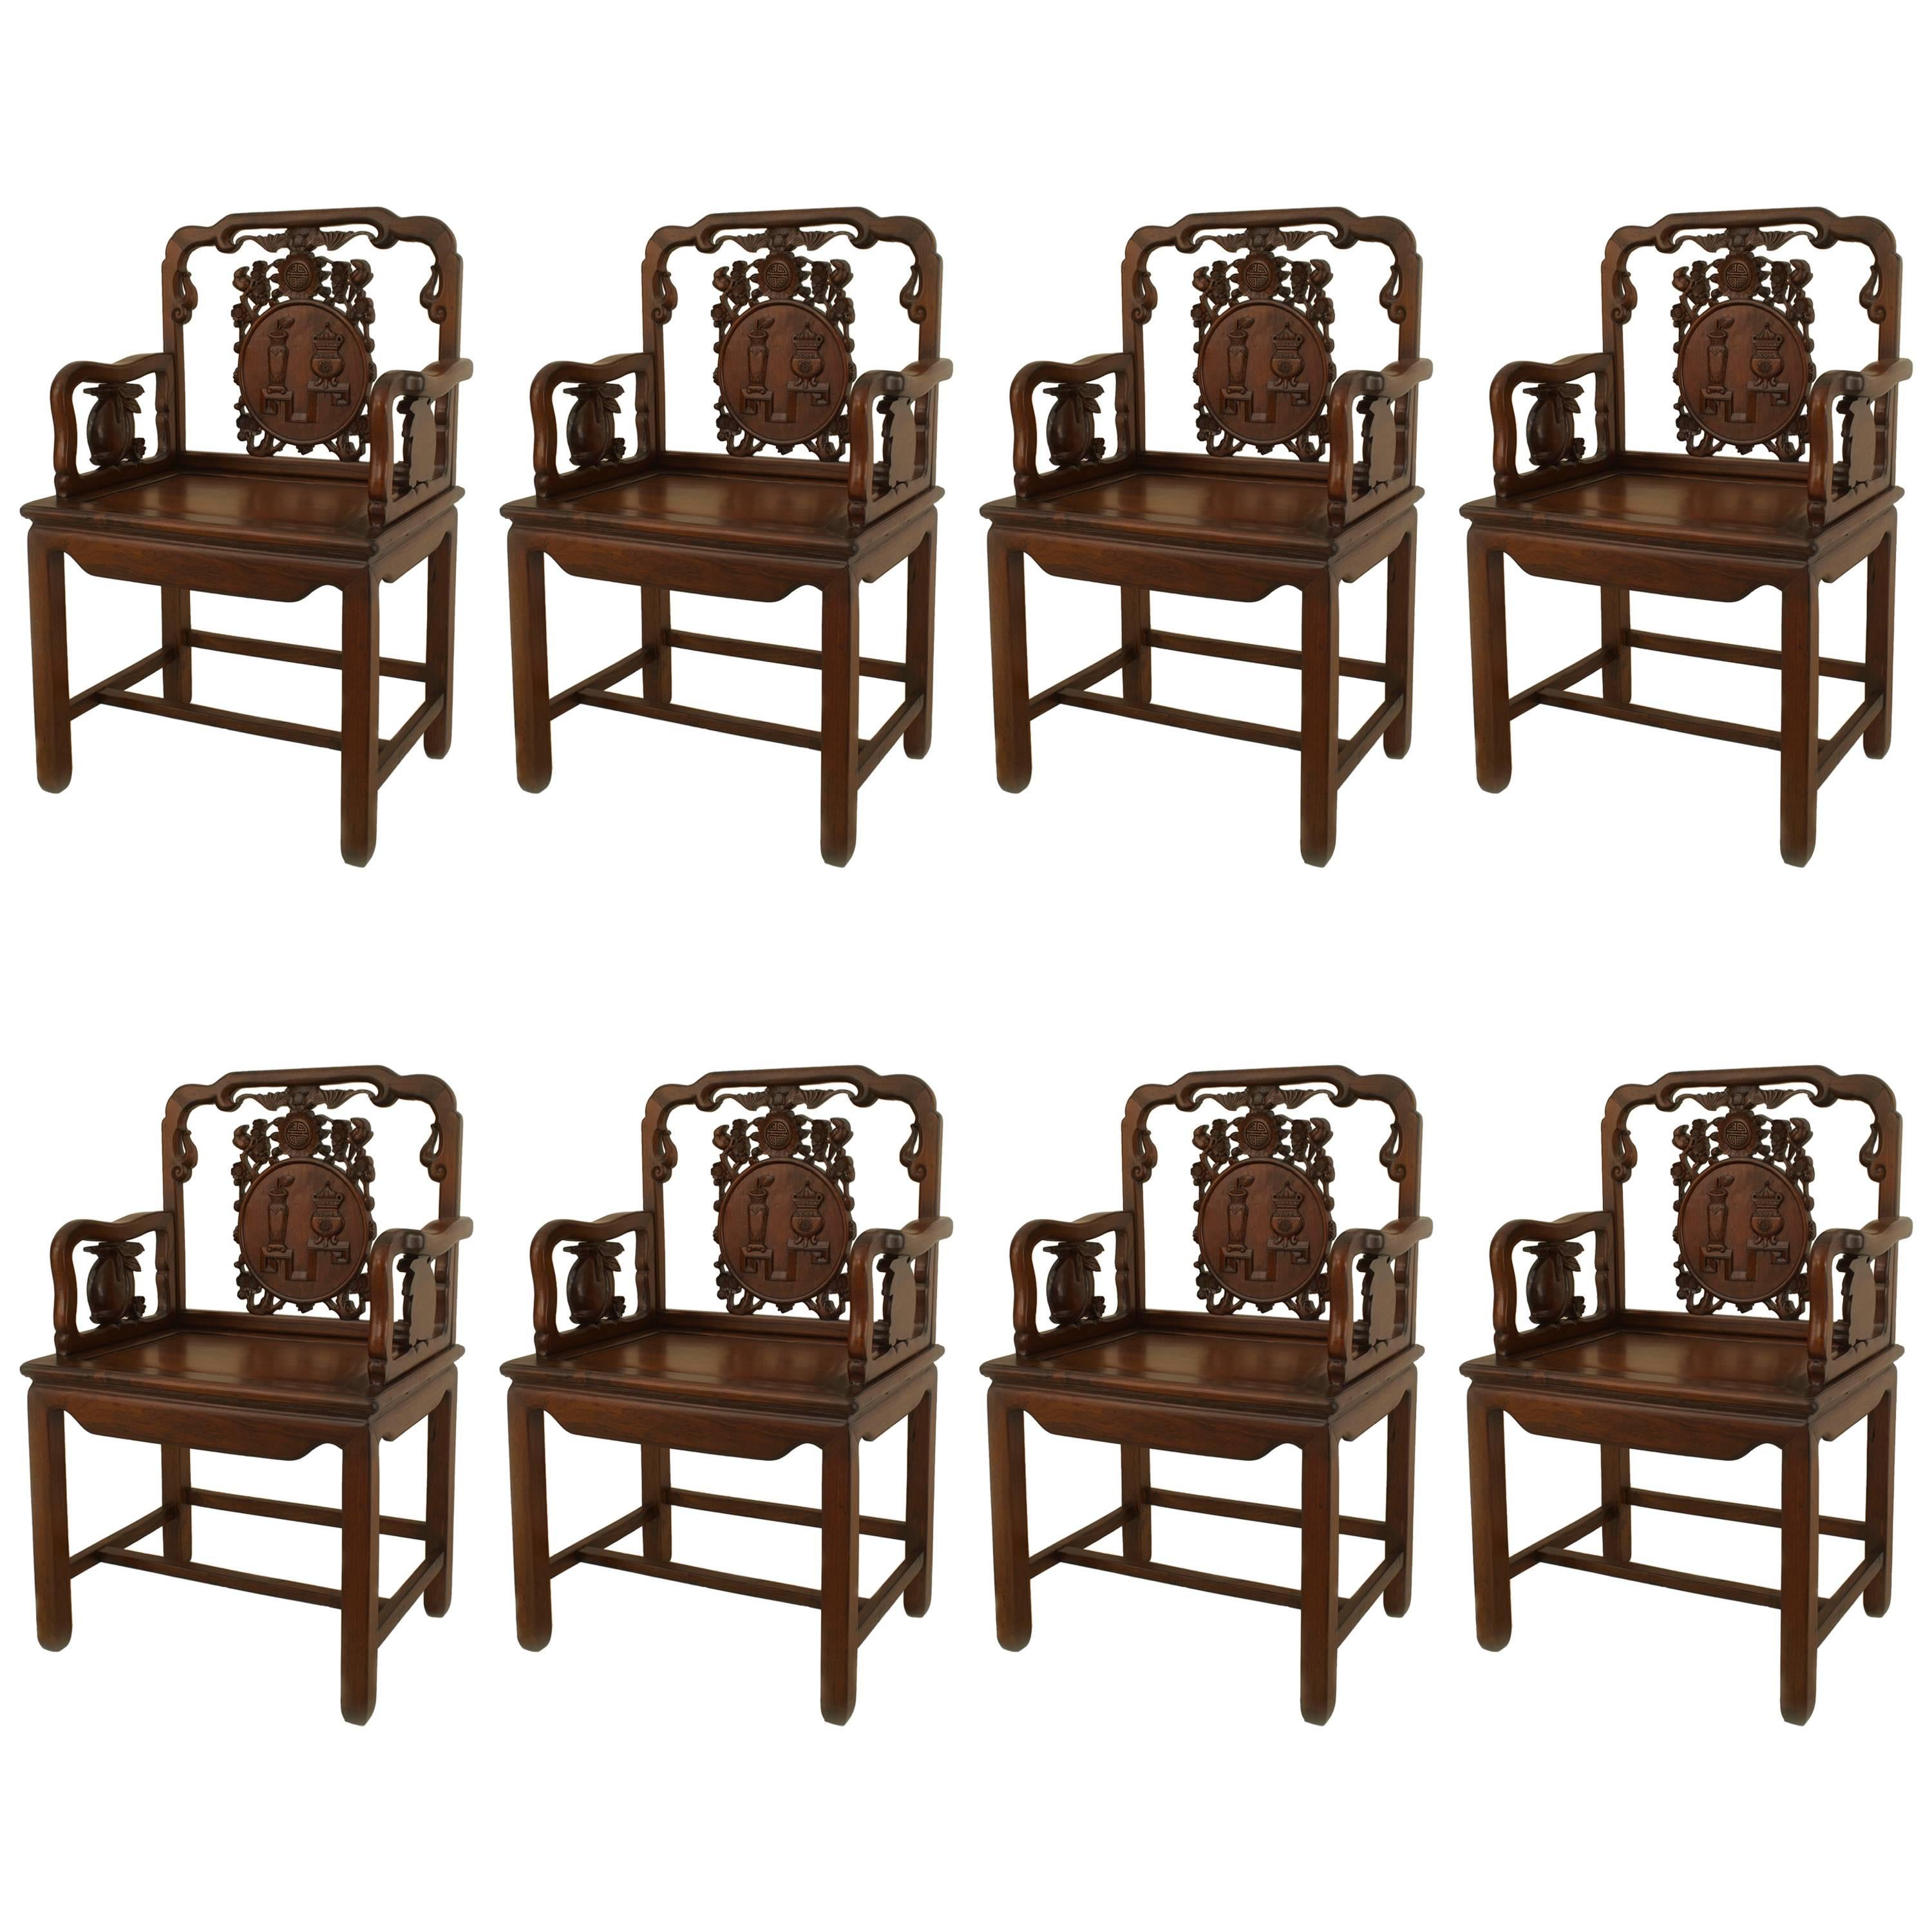 Set of 8 Chinese Rosewood Carved Arm Chairs For Sale